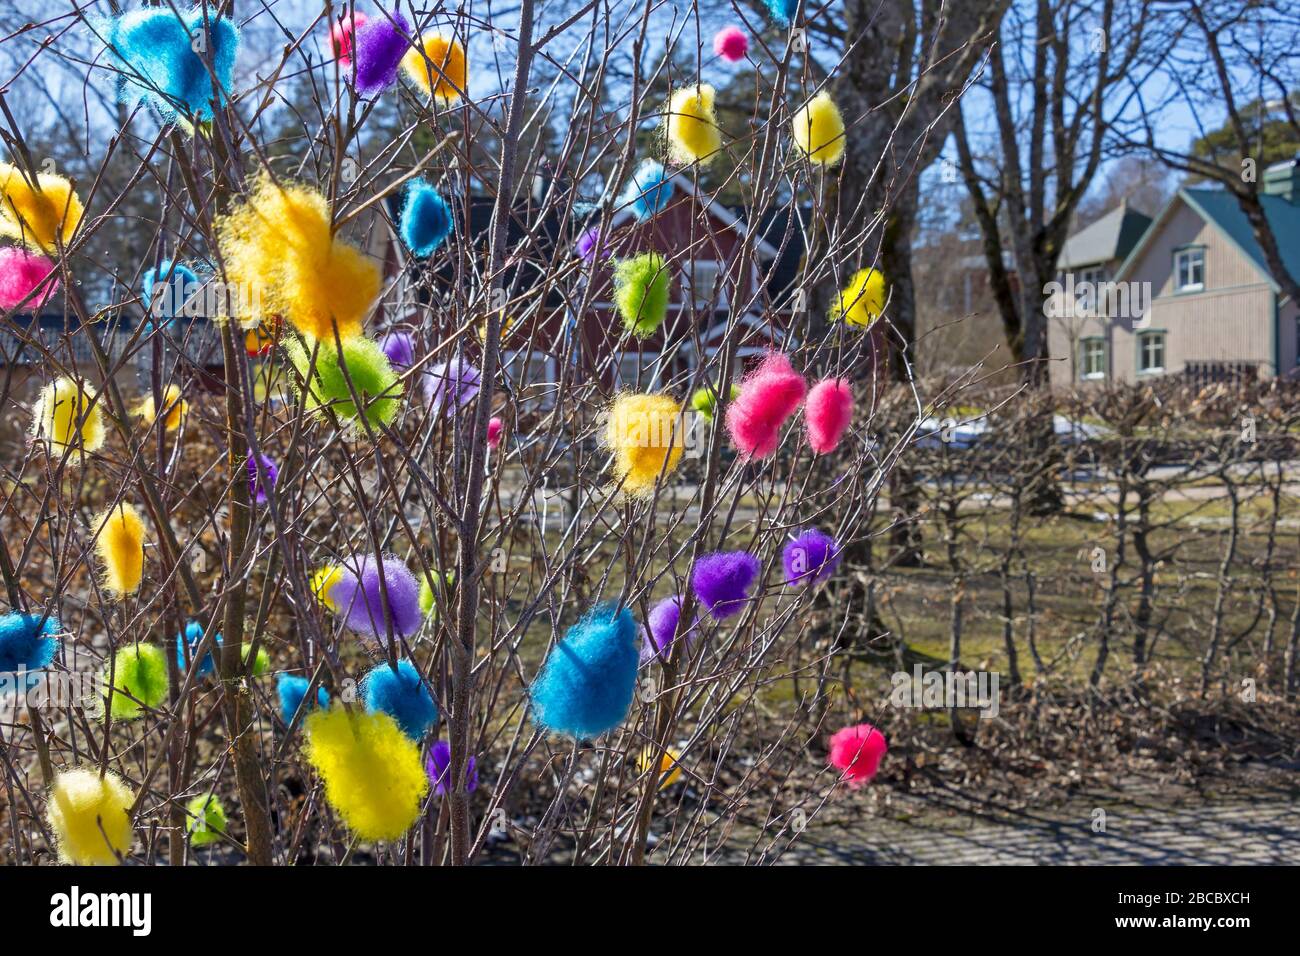 A typical Scandinavian easter custom to decorate branches with colored feathers or cotton wool. Spring landscape in Sweden. Stock Photo